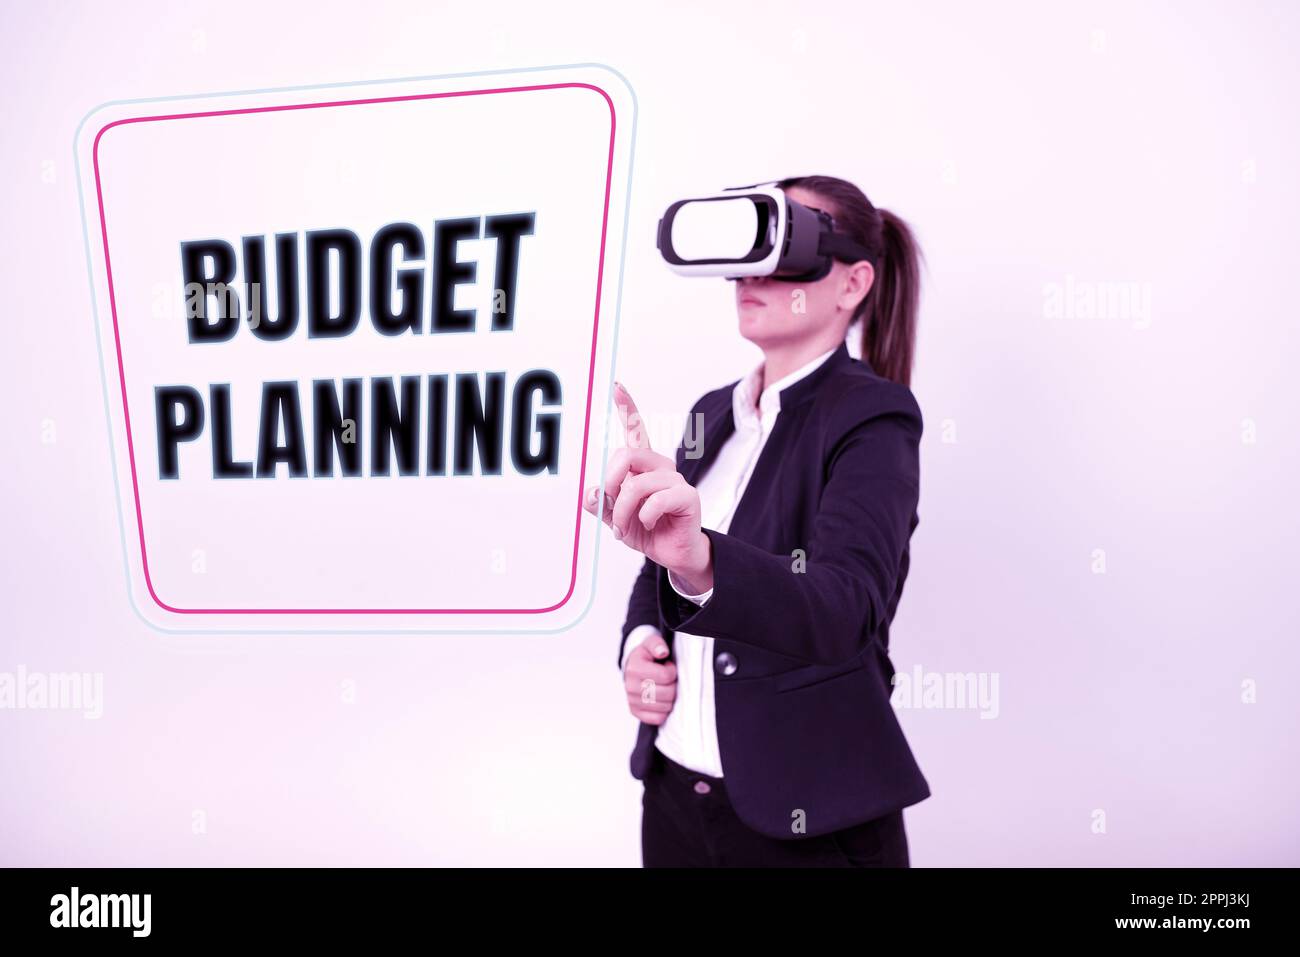 Writing displaying text Budget Planning. Word Written on purchasing process that businesses lead their customers Woman Wearing Vr Glasses And Pointing On Important Message With One Finger. Stock Photo